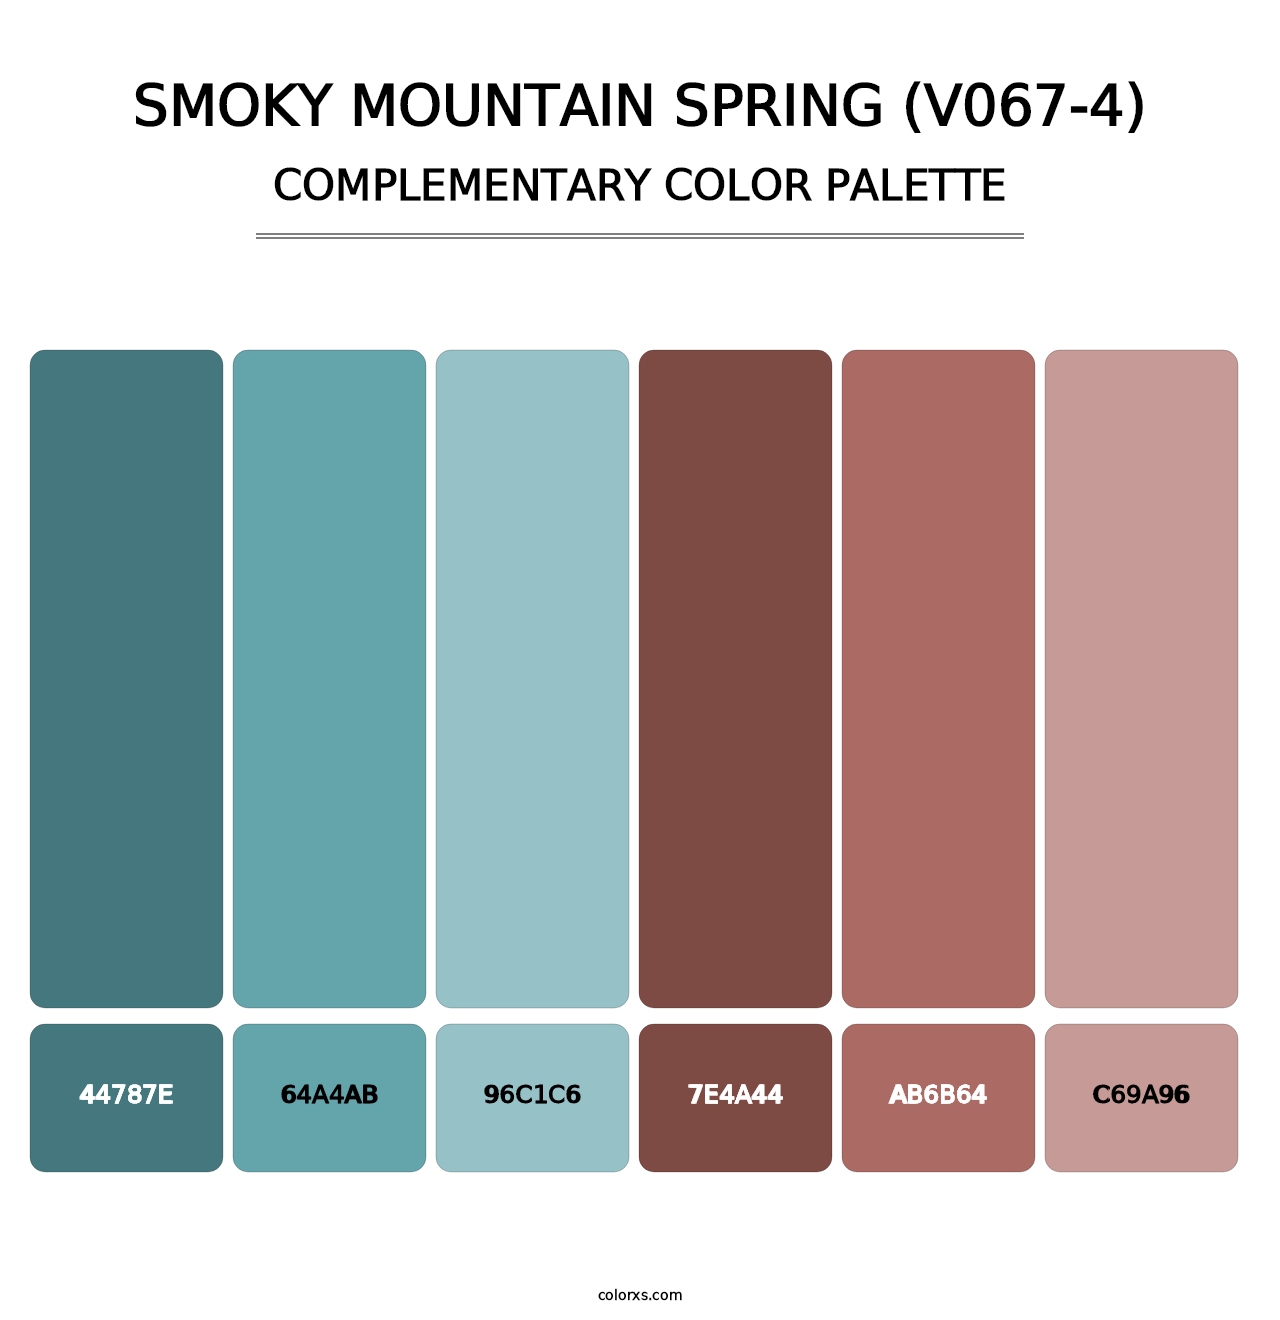 Smoky Mountain Spring (V067-4) - Complementary Color Palette